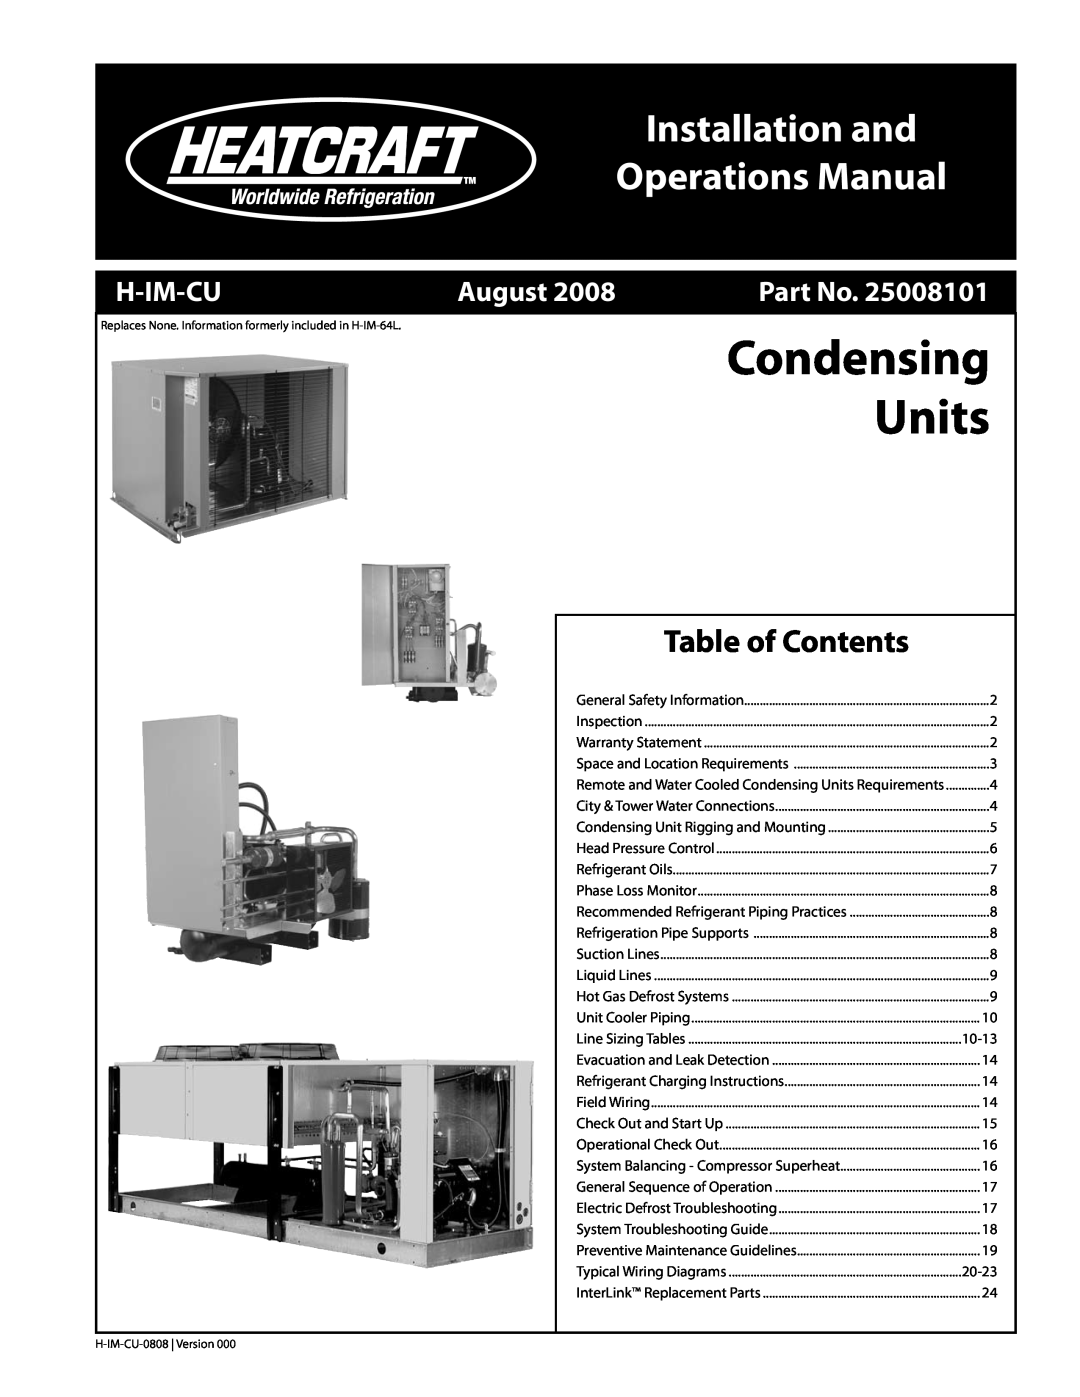 Heatcraft Refrigeration Products H-IM-CU warranty Units, Condensing, Installation and Operations Manual, Table of Contents 